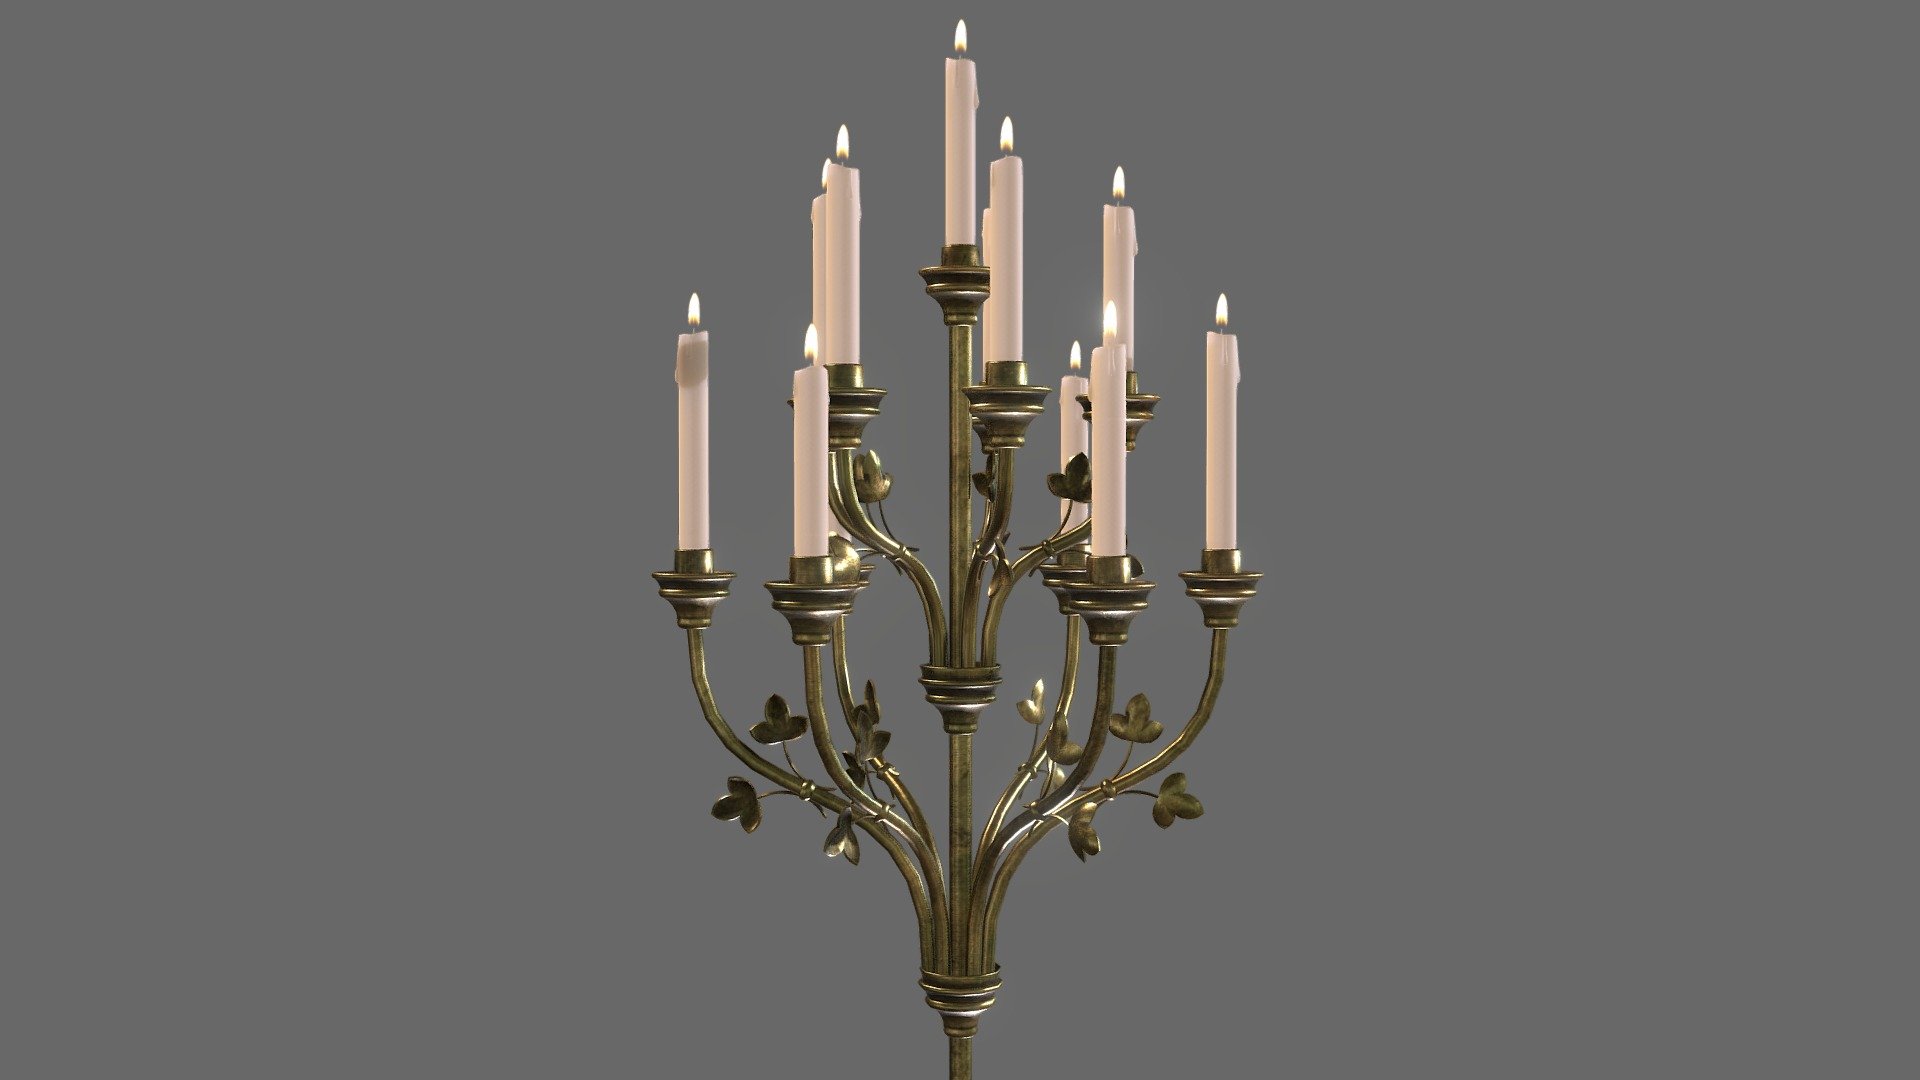 Floor Standing Candle Holder

This is a big brass wrought candle holder that can decorate castles or gothic environments.

Measures:

Height: 2 meters (with the candles) Width: 53 centimeters

Textures:

The models has PBR textures, and includes:

Candle Stand Holder - 4K Resolution
* Base Color
* Metallic
* Roughness
* Normal Map

Candles - 2K Resolution
* Base Color
* Roughness
* Normal Map
* Emission

Flame - 512px Textures
* Diffuse Color
* Emission - Floor Standing Candle Holder - Buy Royalty Free 3D model by pixeldigitalarts by Giovanni Lucca (@pixeldigitalarts) 3d model